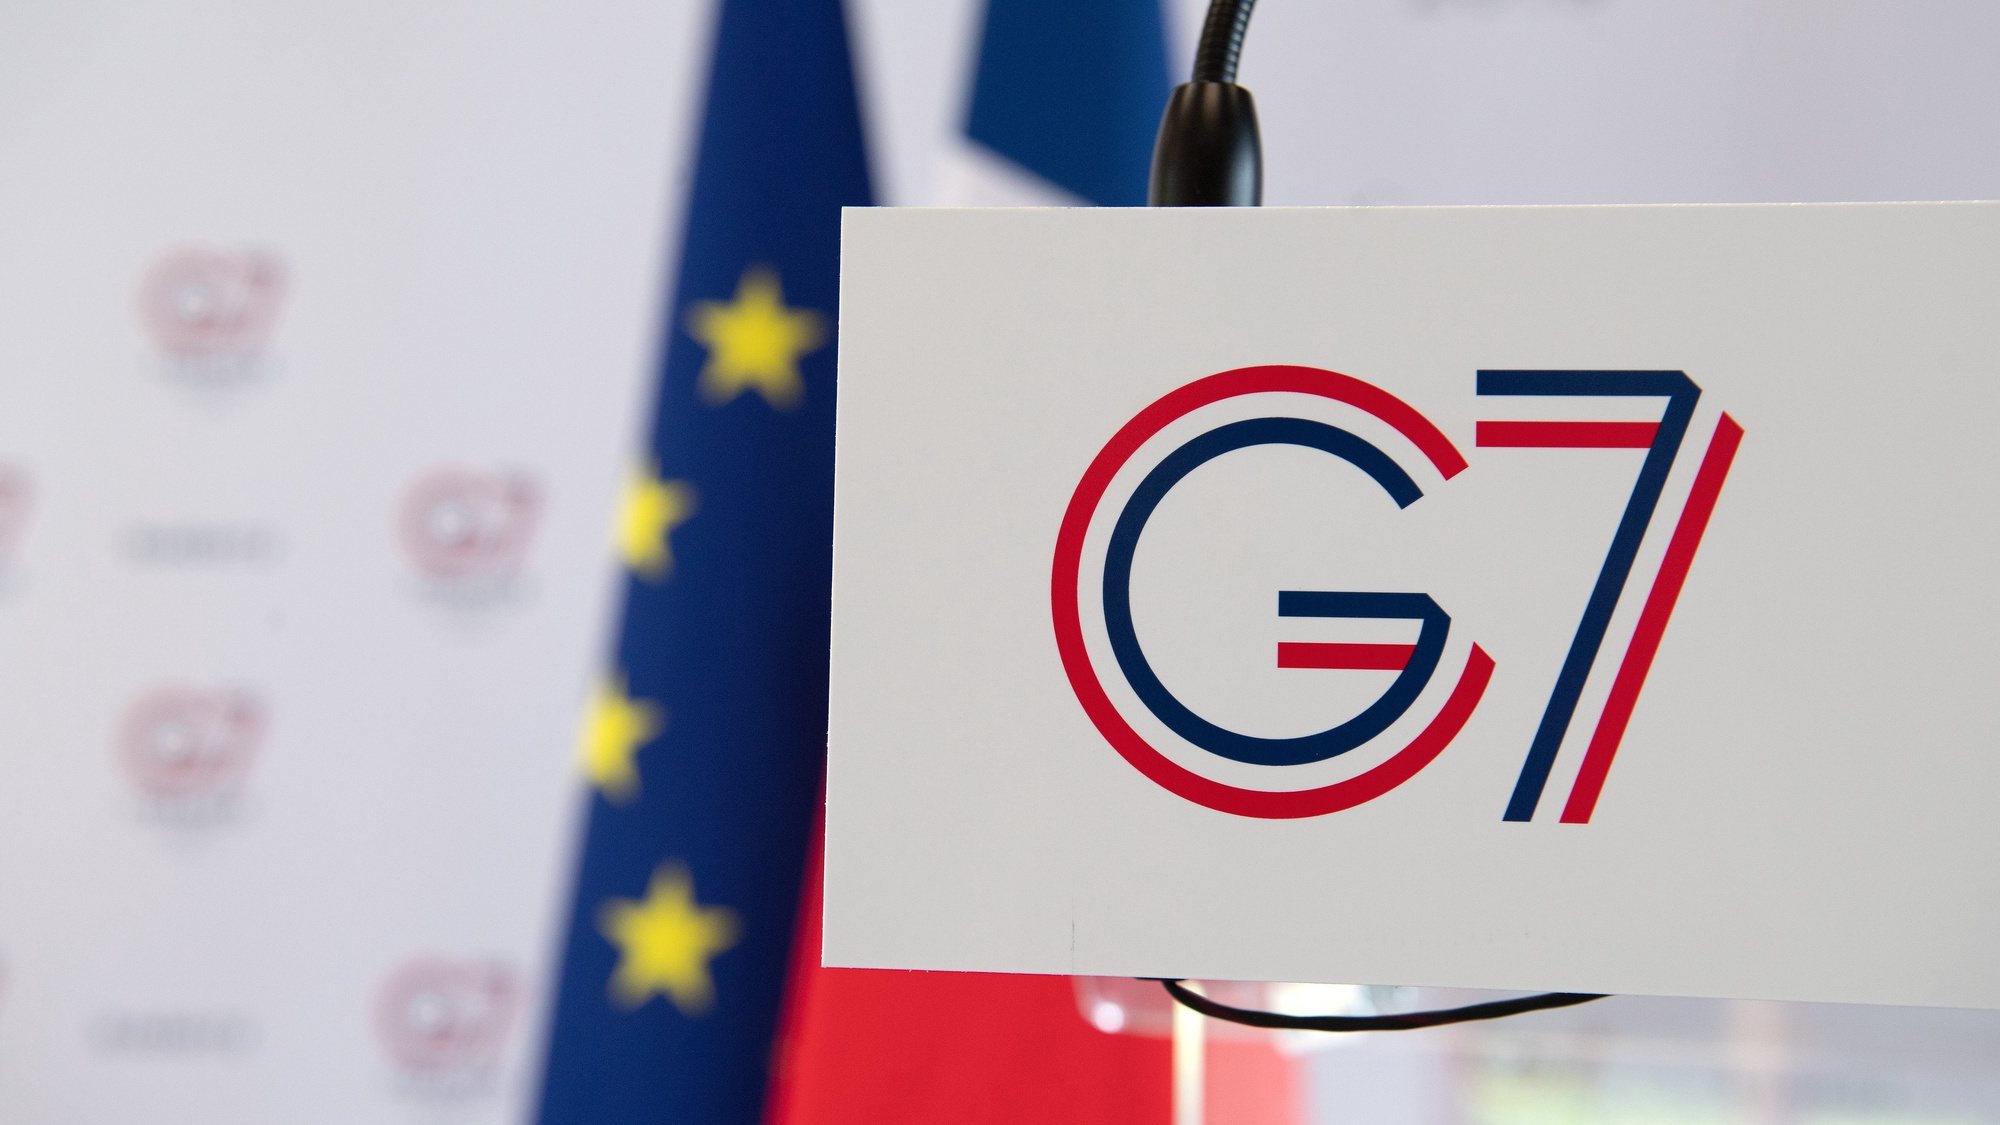 epa07782328 The G7 logo is visible in the press room before the press conference of French Minister of the Interior, Christophe Castaner, on the security measures before G7 in Biarritz, Basque Country, France, 20 August 2019. The Group of Seven (G7) summit will take place in French Bayonne (Biarritz) from 24 to 26 August 2019.  EPA/CAROLINE BLUMBERG